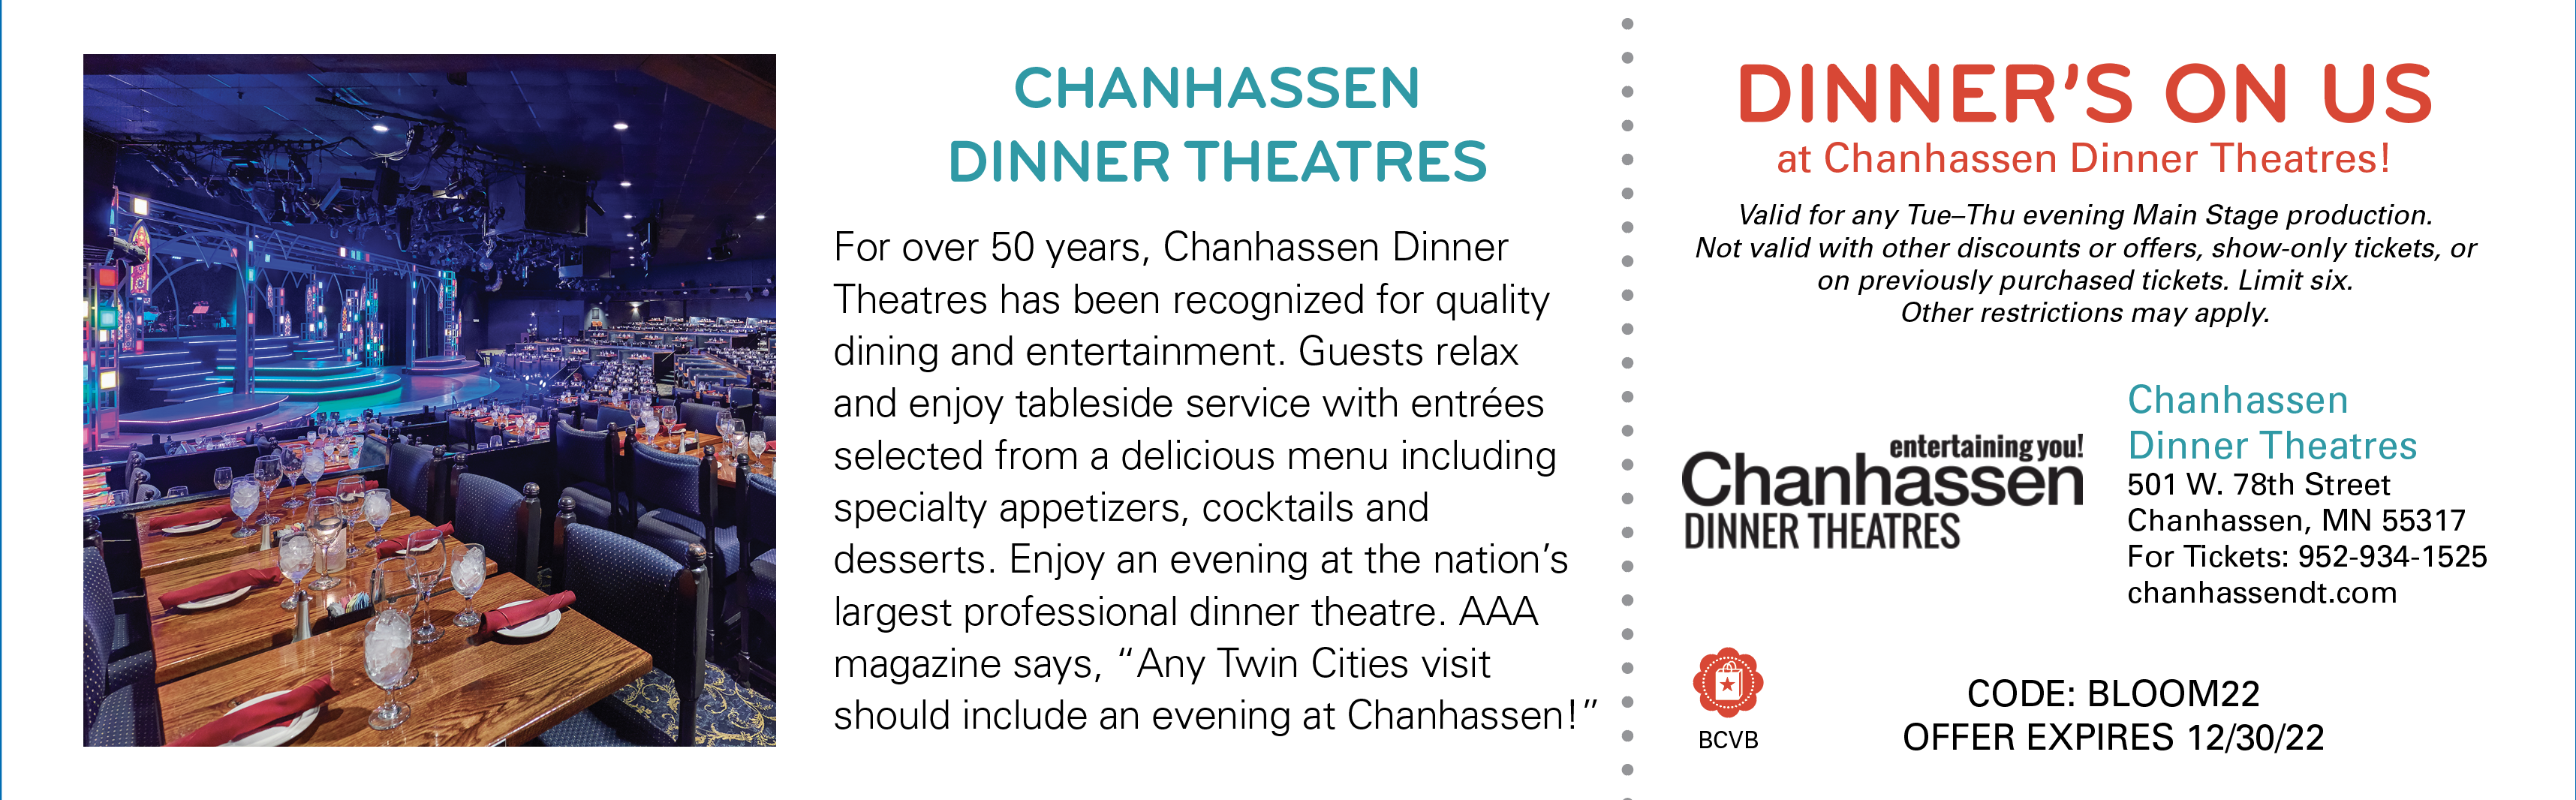 Chanhassen Dinner Theater Coupon